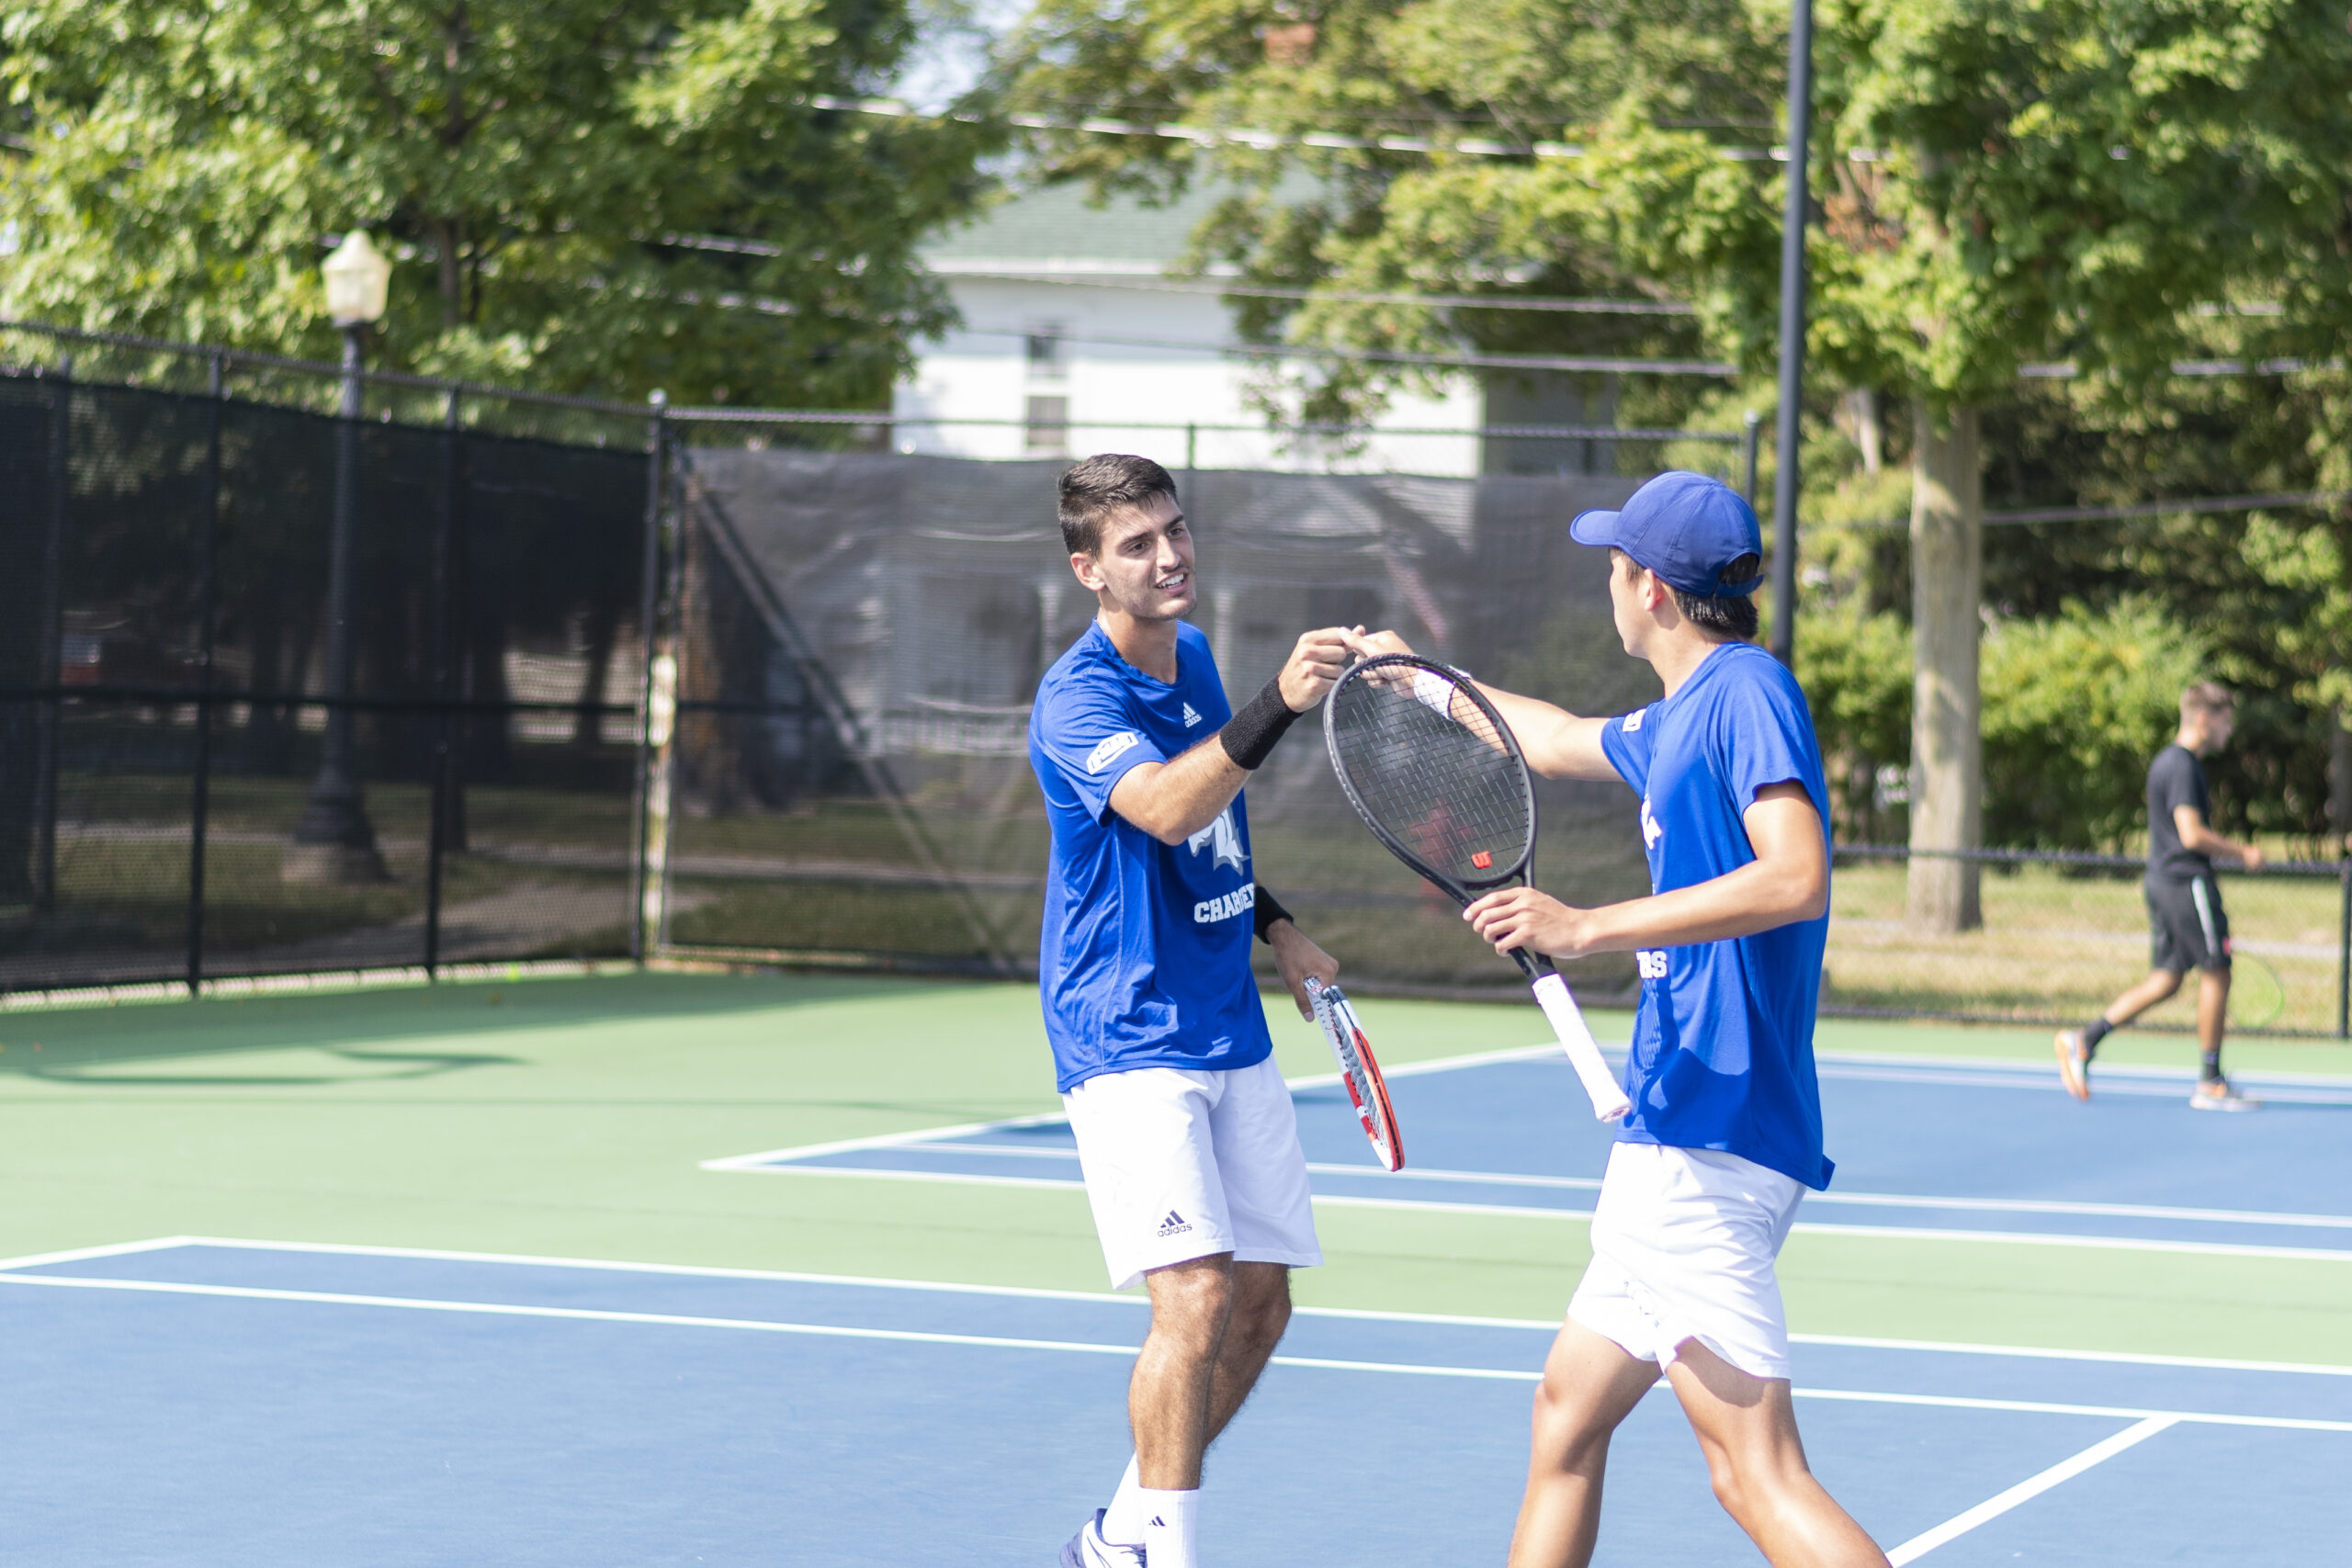 Hobbled by injuries, men’s tennis falls to 2-4